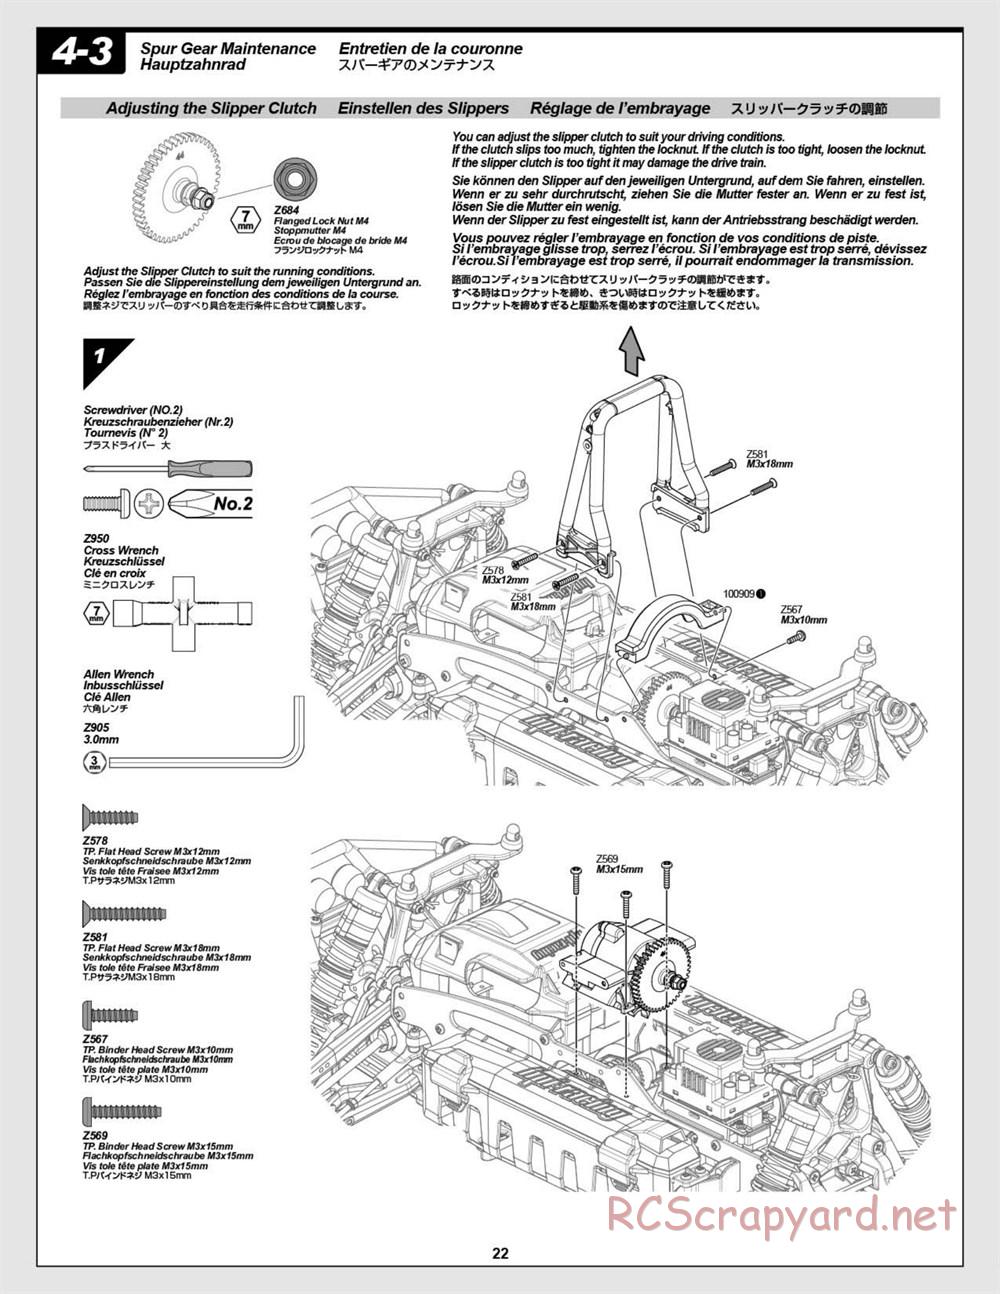 HPI - Savage Flux HP - Manual - Page 22